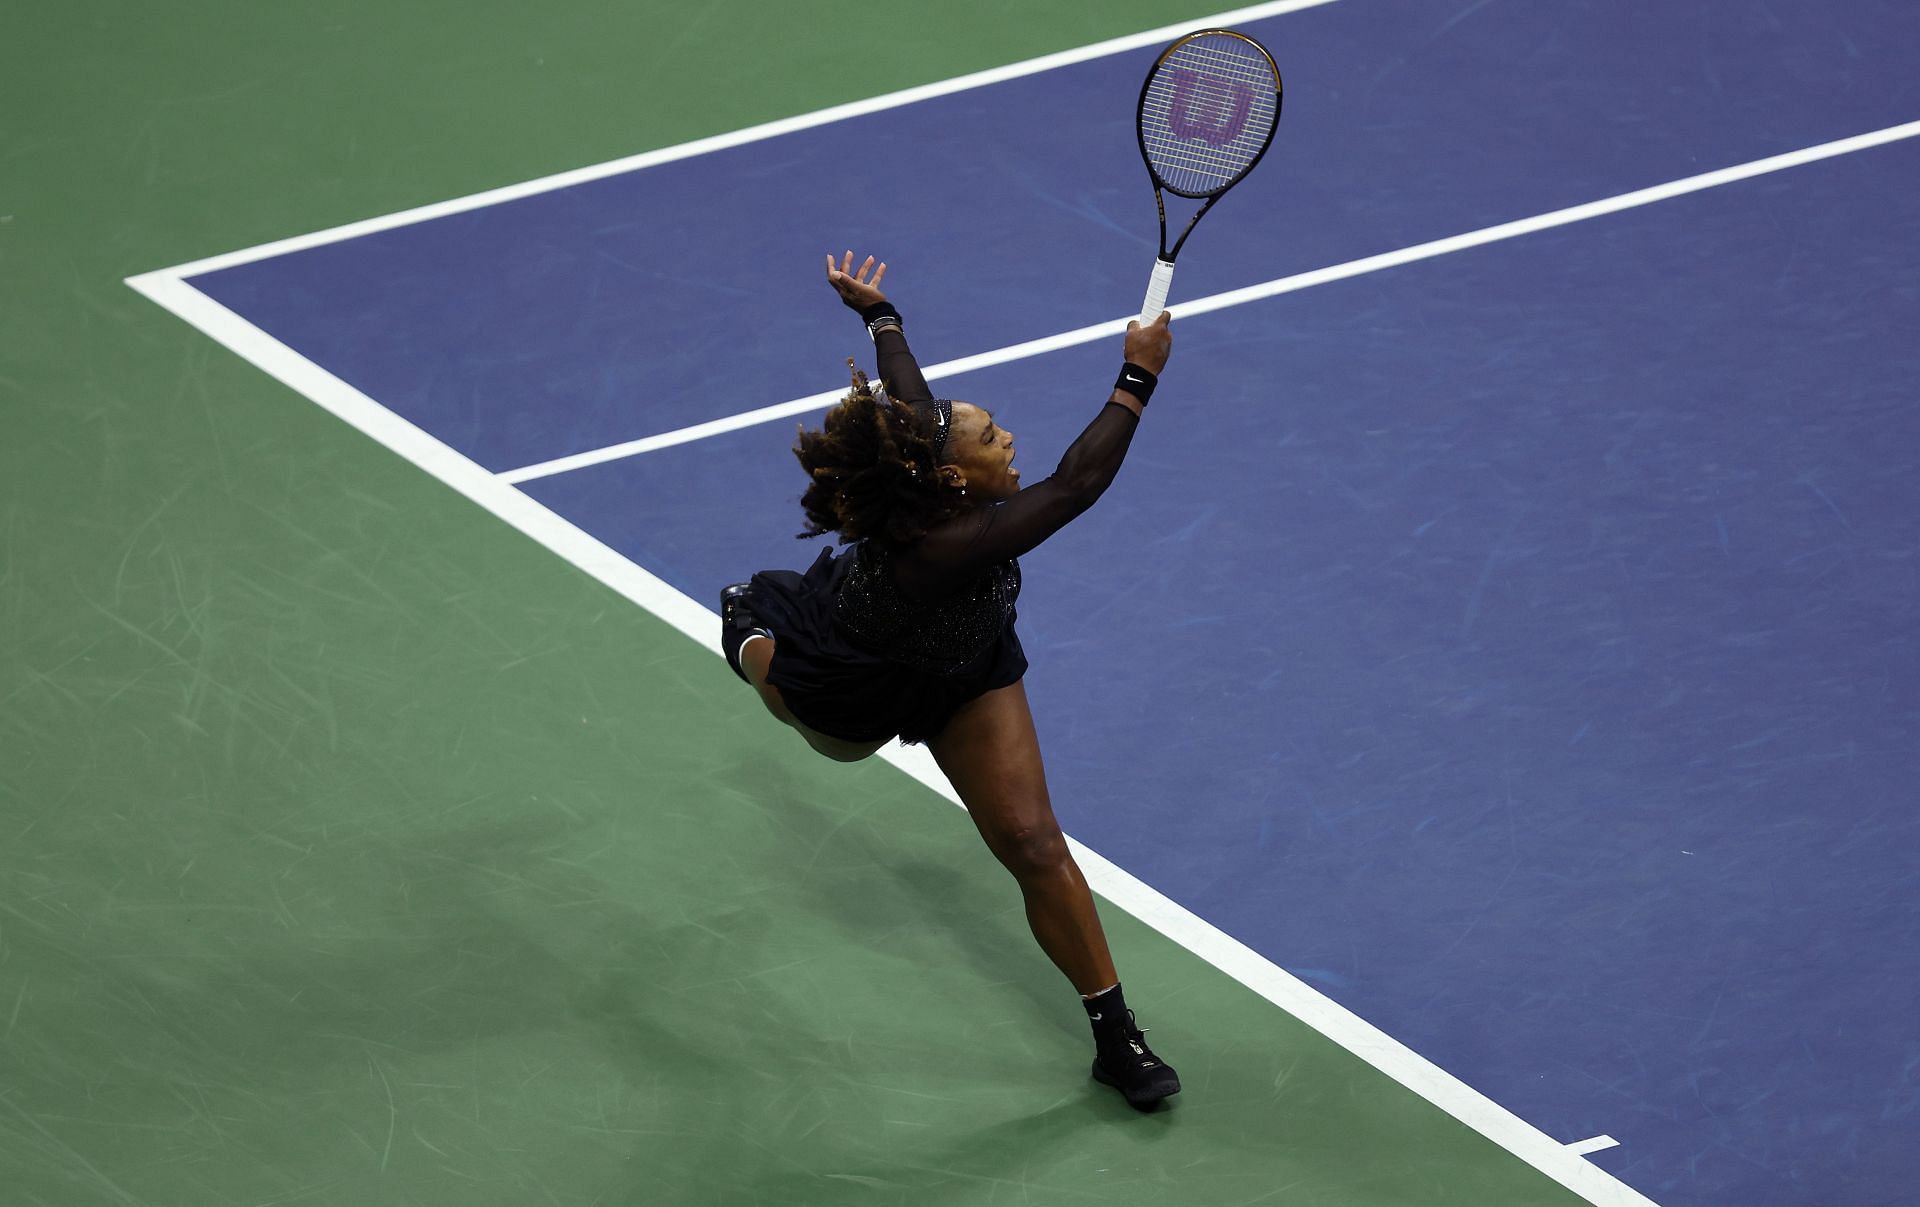 Serena Williams in action during her match against Ajla Tomljanovic at he 2022 US Open